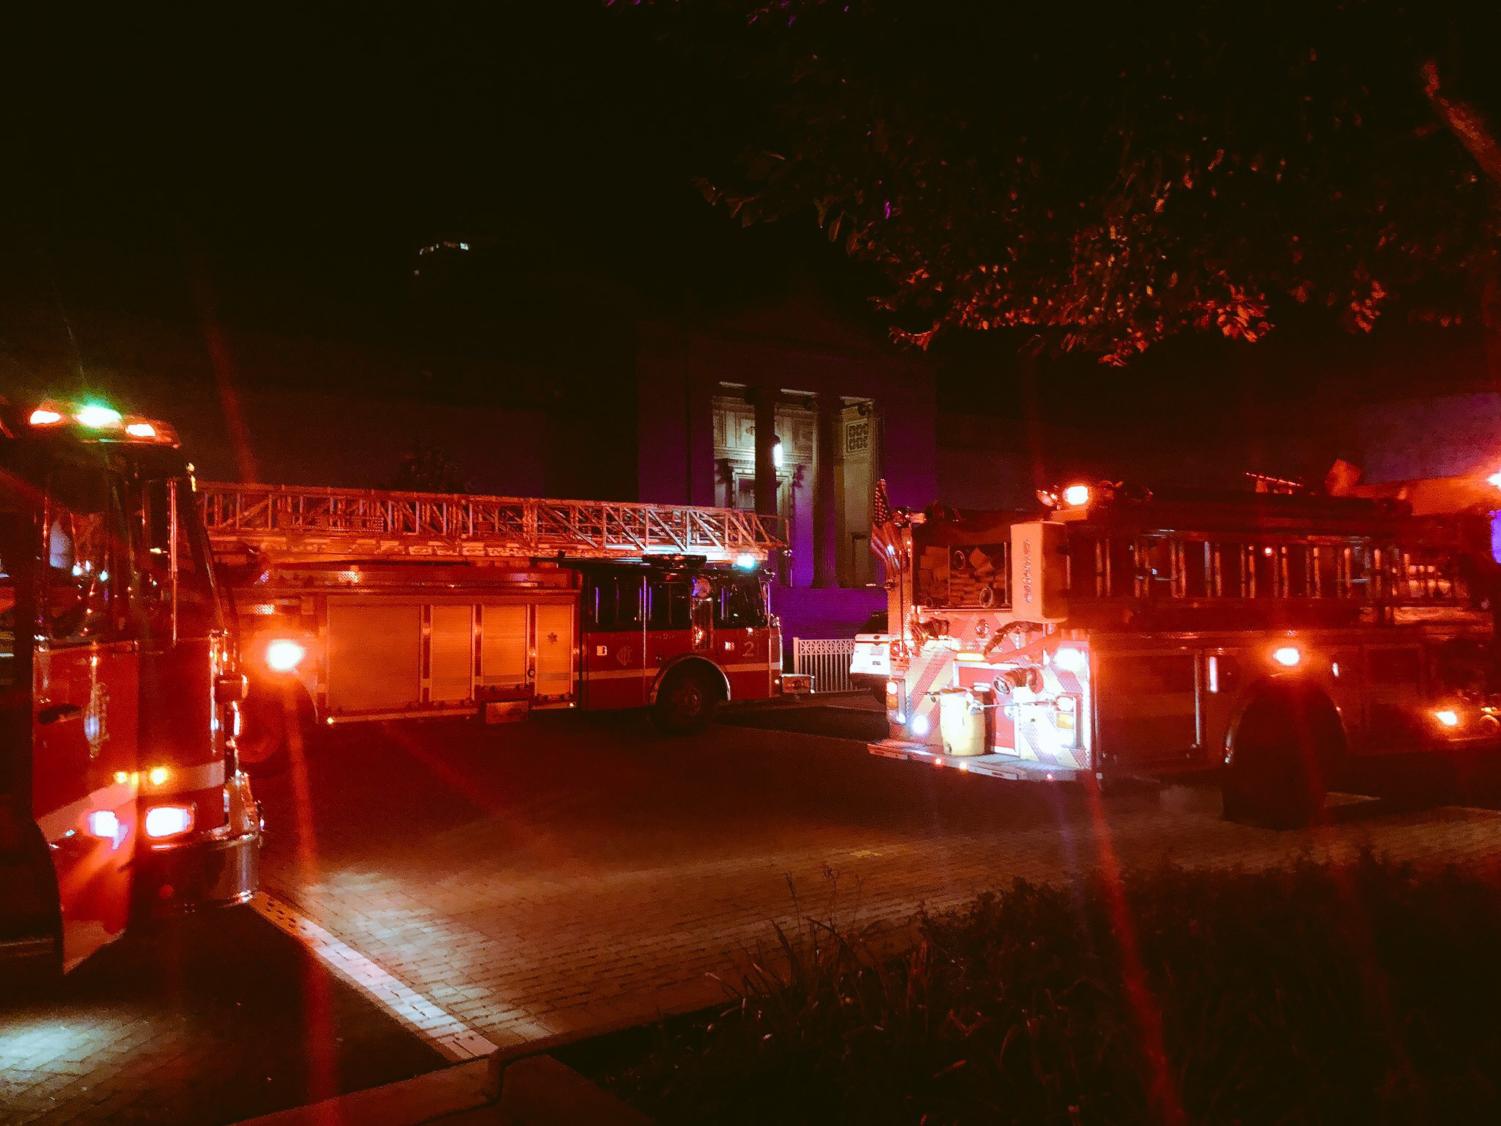 The scene outside the Museum of Science and Industry Monday night, where at least 8 Chicago Fire trucks were stationed in the parking lot.